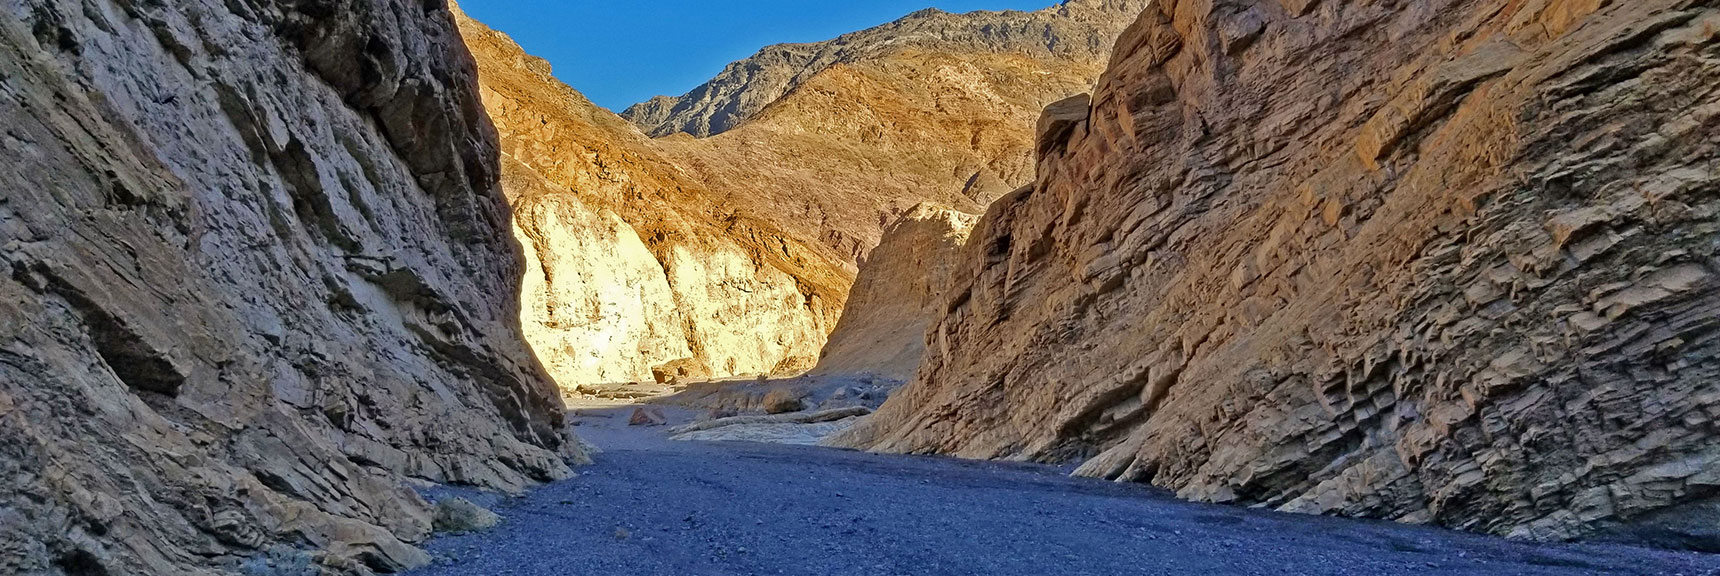 Canyon Begins to Open Up | Mosaic Canyon, Above Stovepipe Wells, Death Valley National Park, California